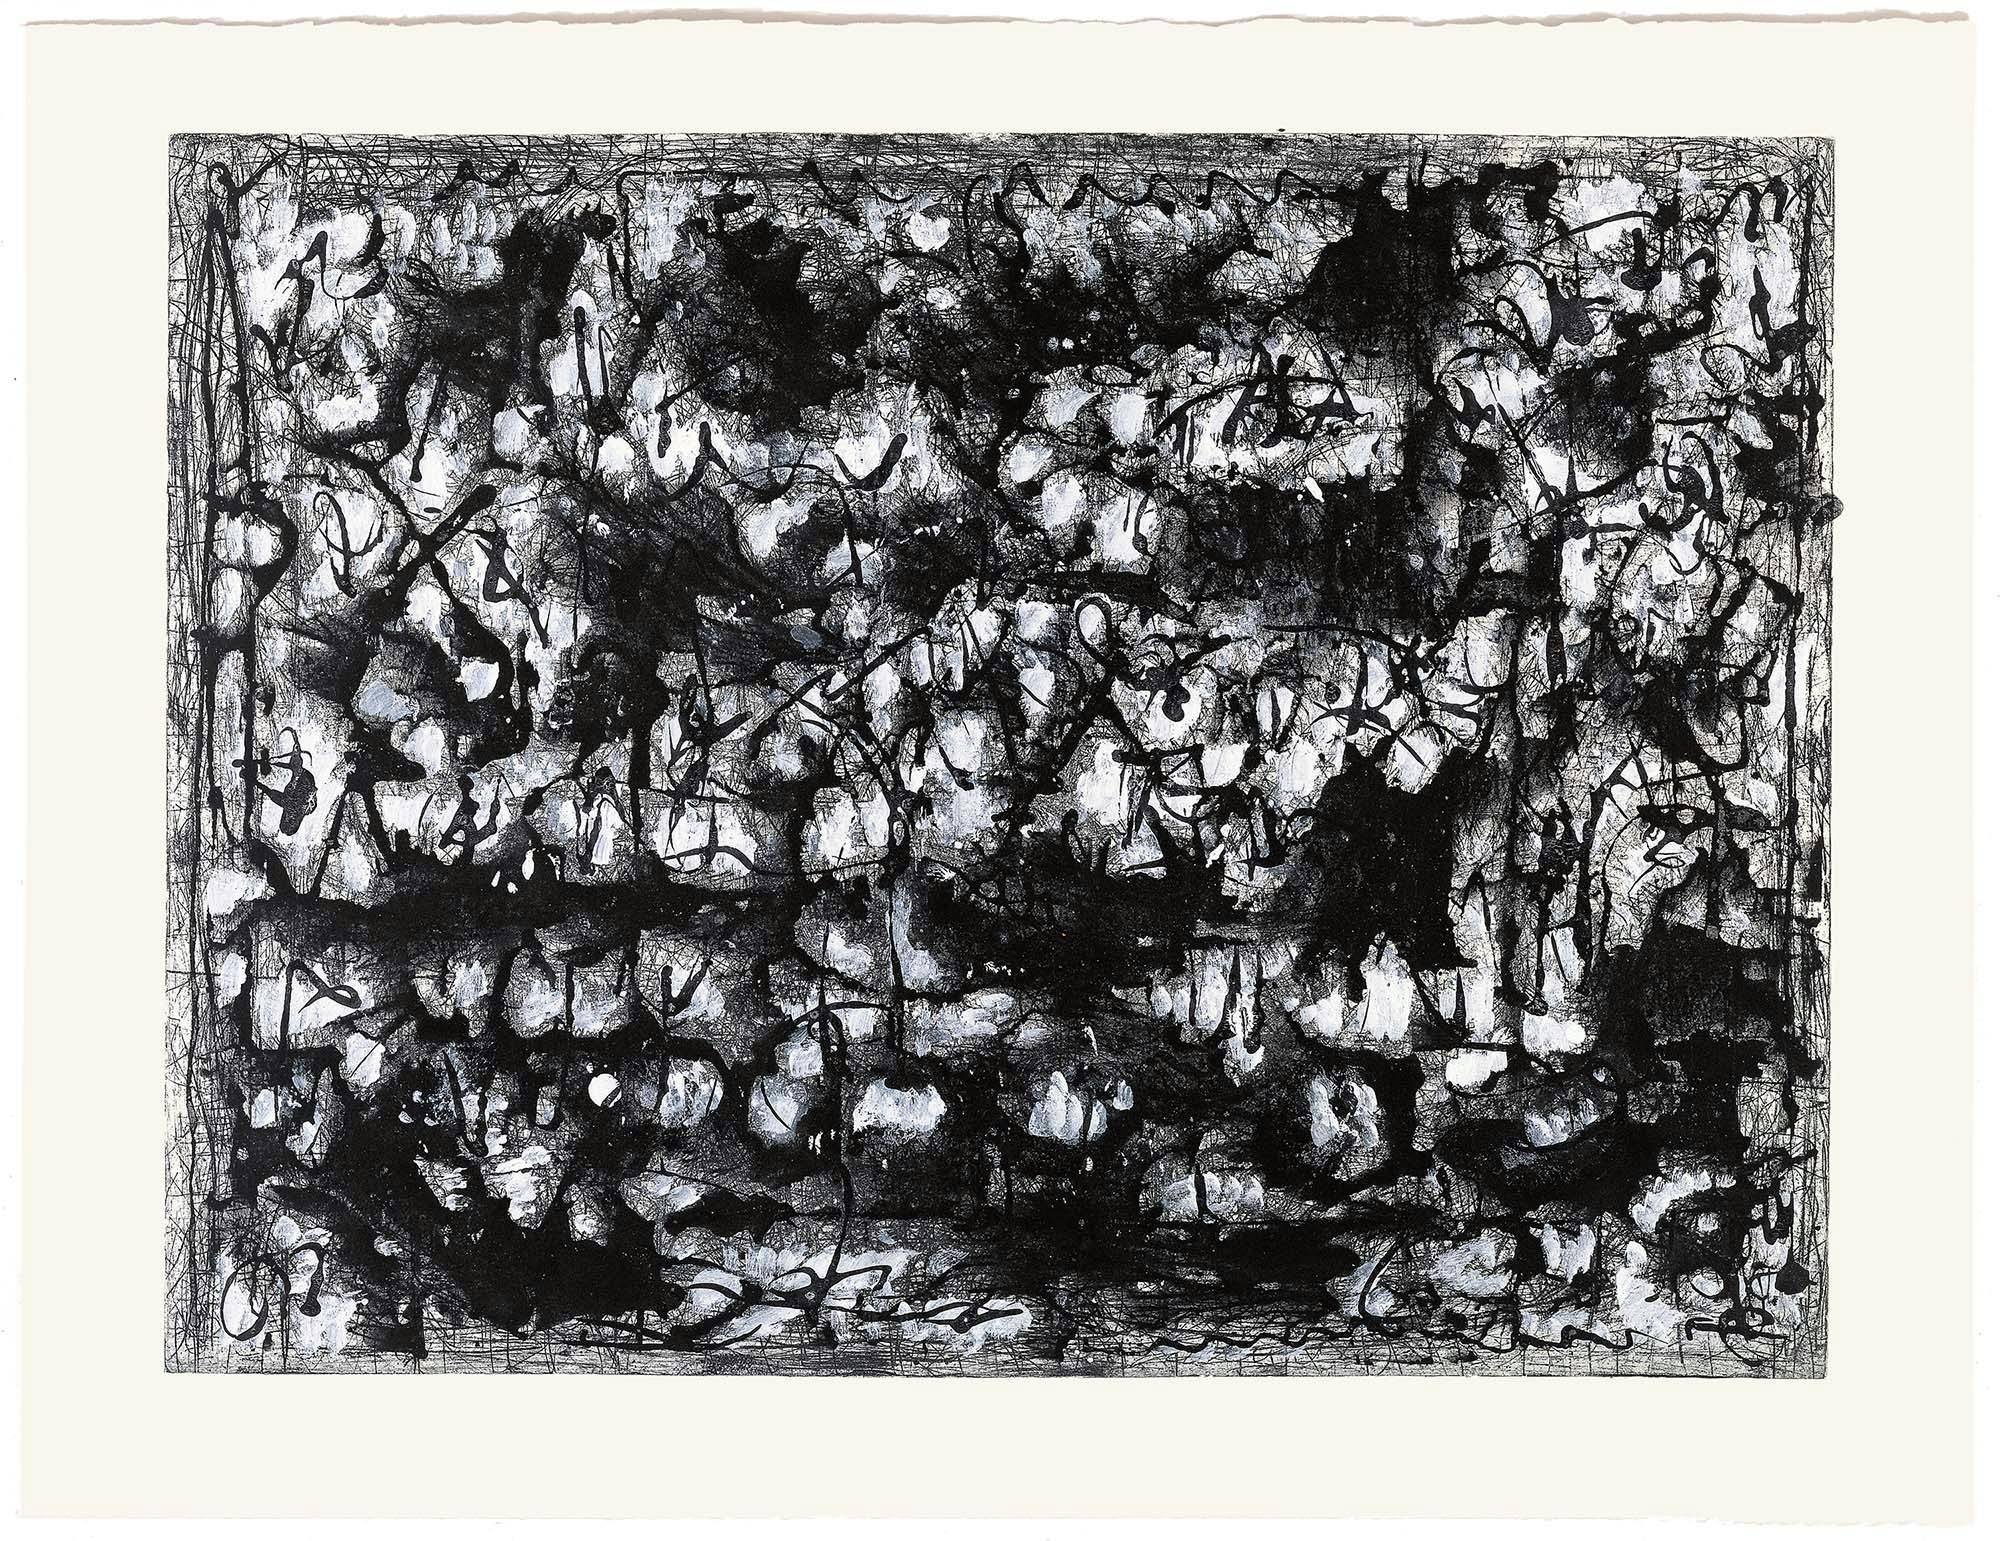 Black and White Landscape
1979
Etching with acrylic
18 x 23 7/8 in. (45.7 x 60.6 cm)
Plate: 17 3/4 x 23 3/4 in. (45.1 x 60.3 cm)
Sheet: 22 1/8 x 31 in. (56.2 x 78.7 cm)
 – The Richard Pousette-Dart Foundation